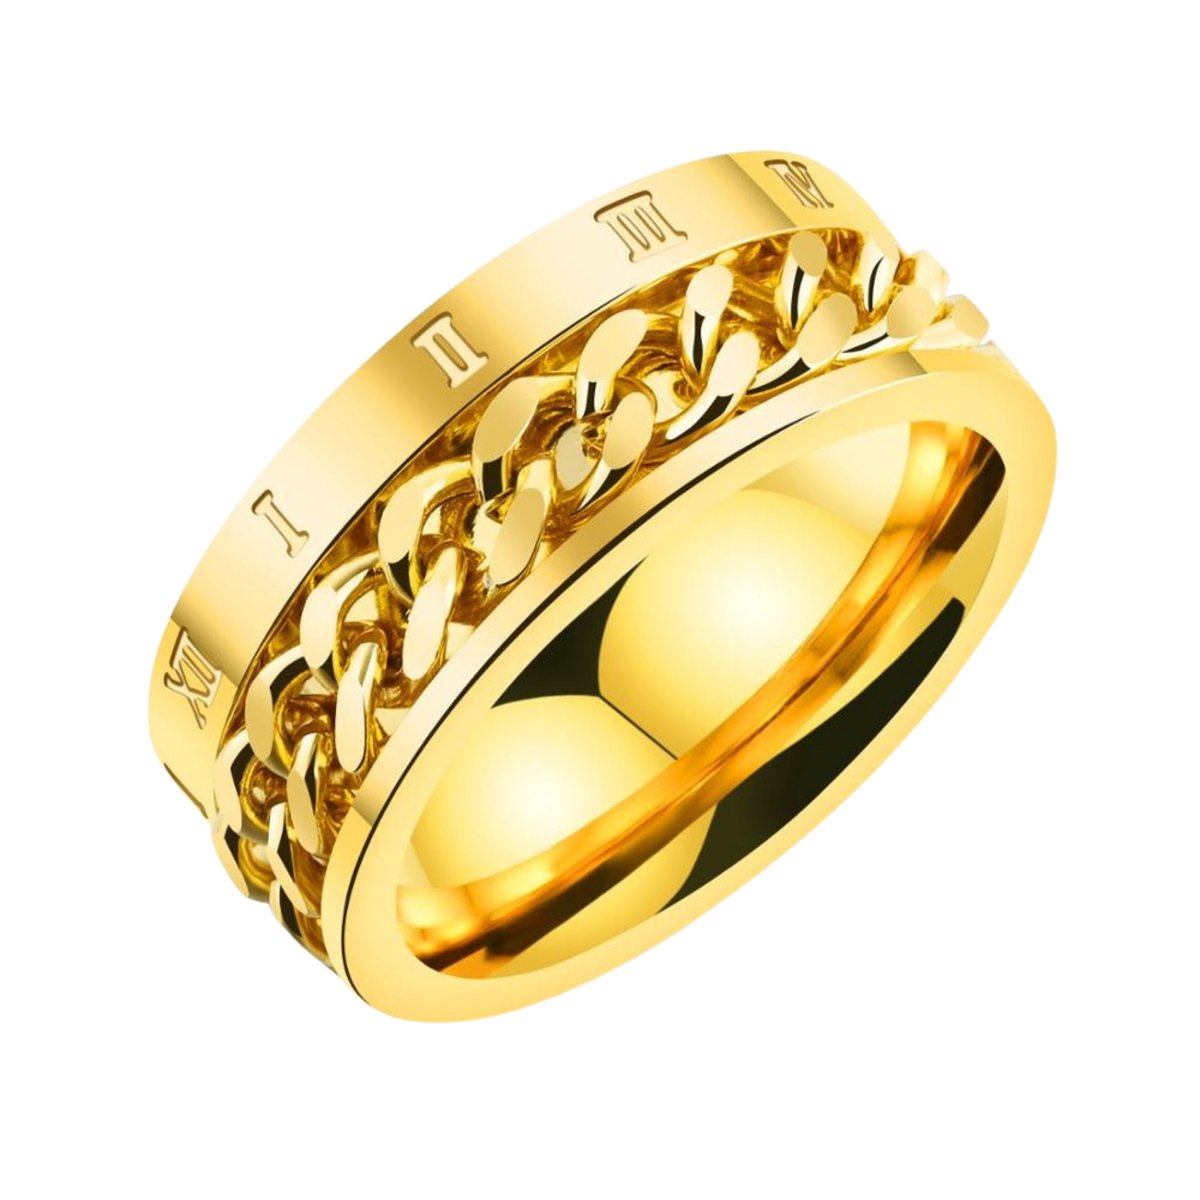 Anxiety Ring - (Rome) - Stress Ring - Fidget Ring - Anxiety Ring For Finger - Draaibare Ring - Spinning Ring - Goud - (17.25 mm / maat 54)